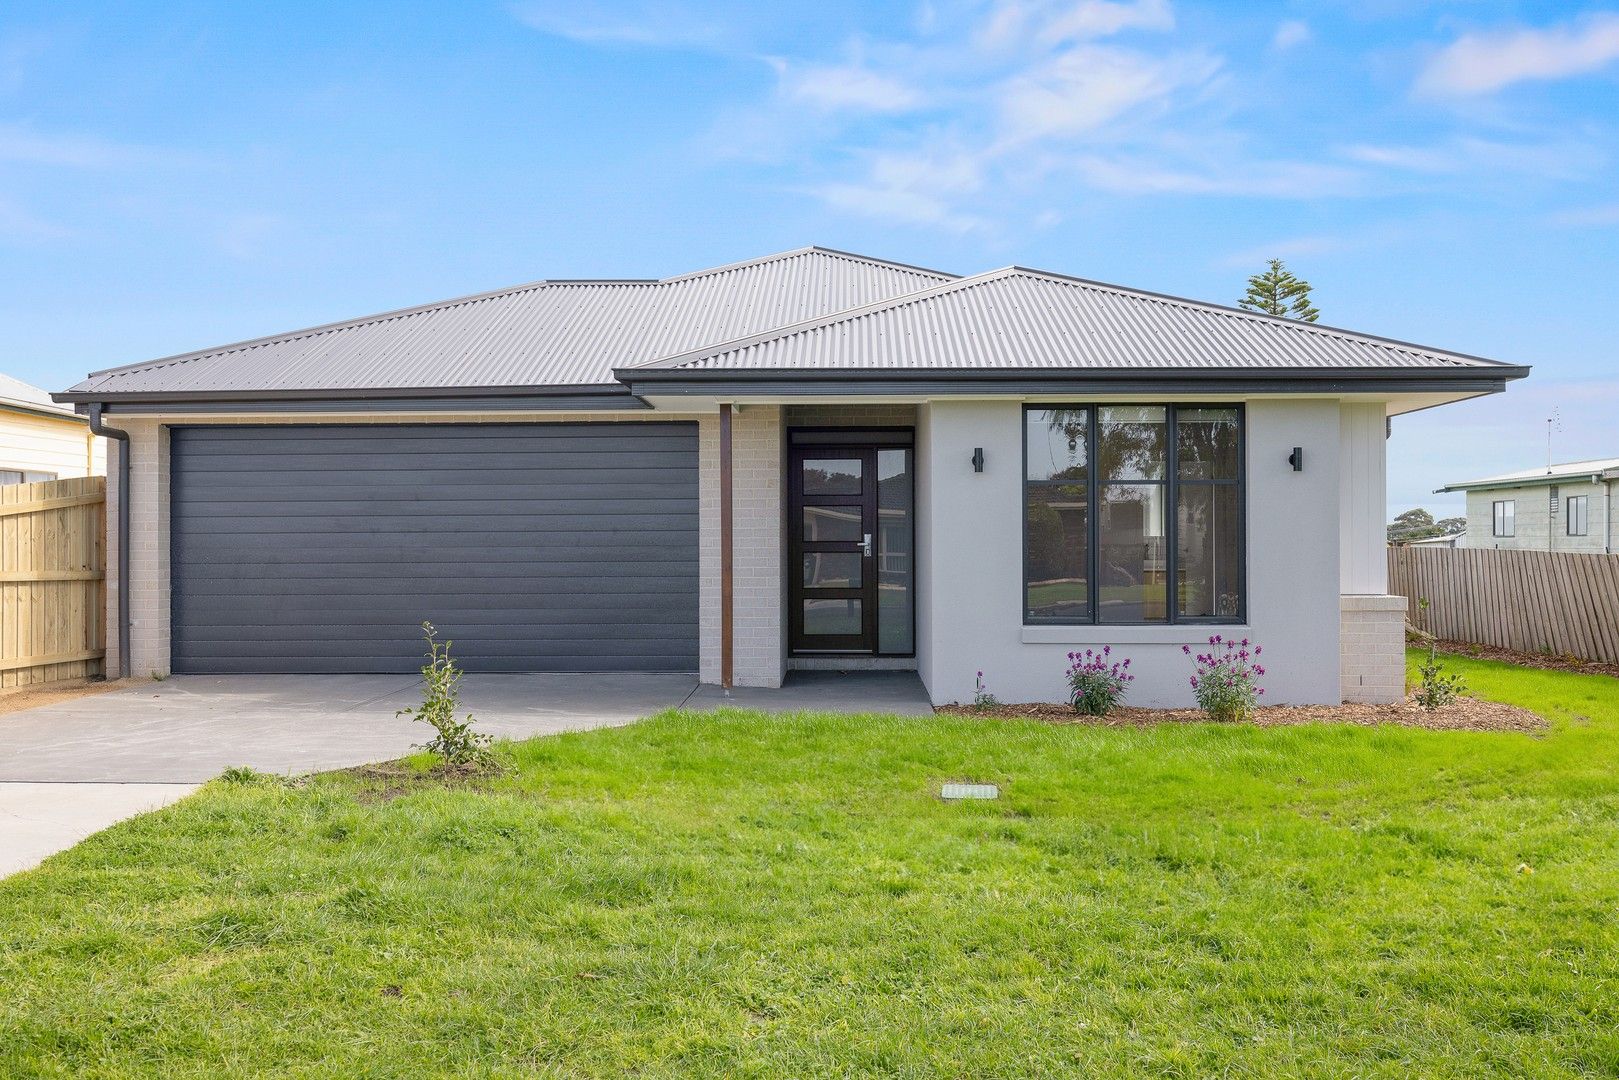 4 bedrooms House in 5B Dowling Street WONTHAGGI VIC, 3995